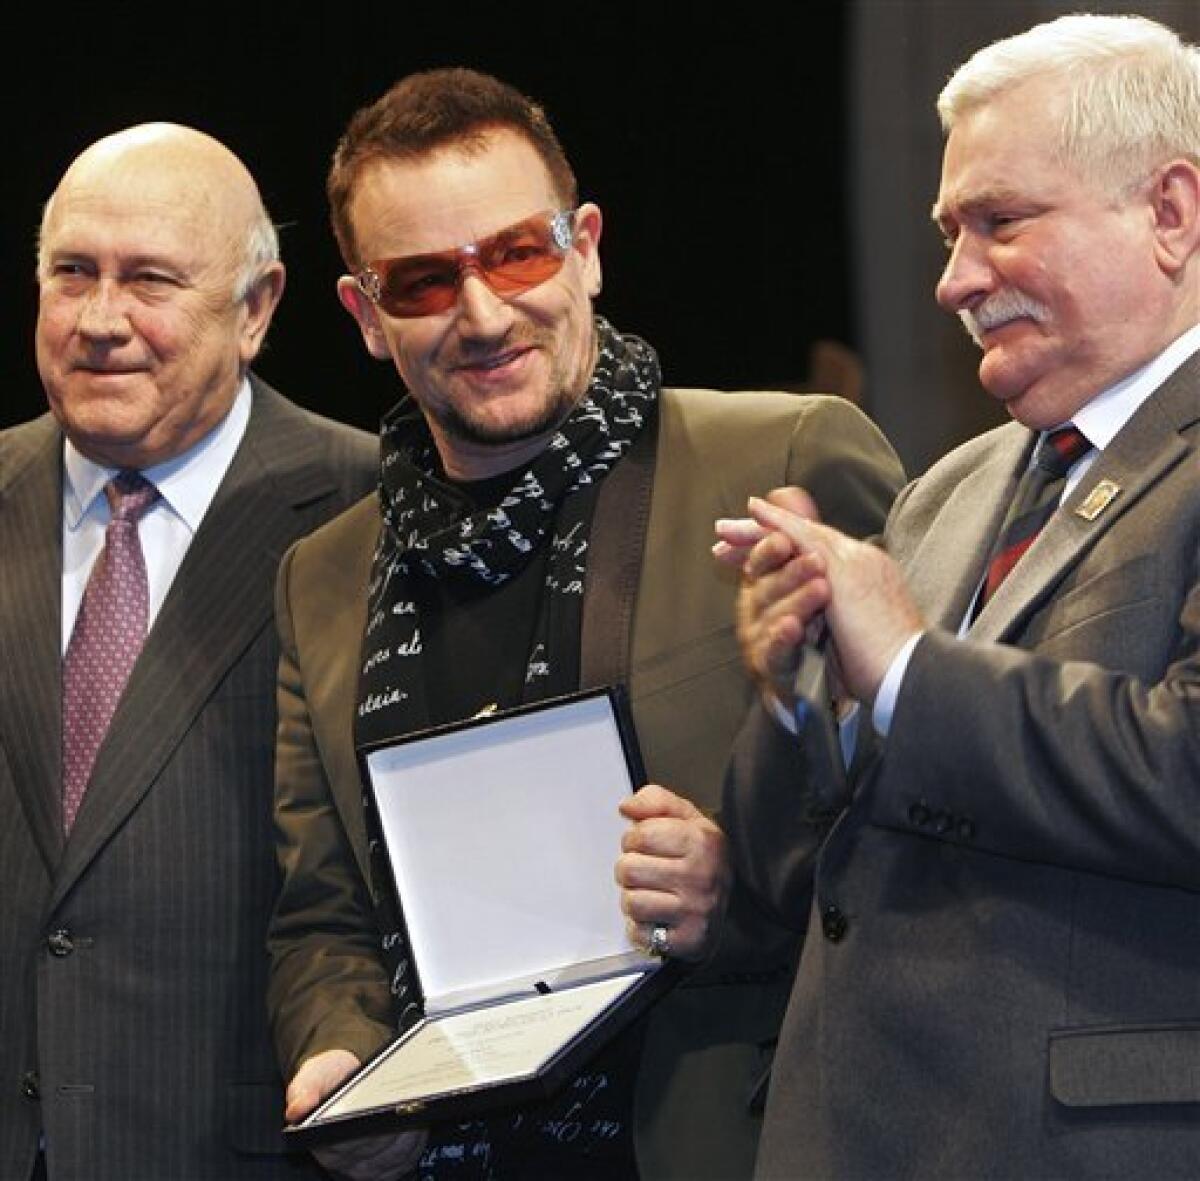 FILE - This is a Friday, Dec. 12, 2008 file photo of Irish singer and activist Bono, center, as neposes with 1993 Nobel Peace Laureate F. W. de Klerk, left, and 1983 Nobel Peace Laureate Lech Walesa after Bono was awarded with the Peace Summit Award during the 9th Summit of Nobel Peace Laureates, in Paris. (AP Photo/Jacques Brinon, File)